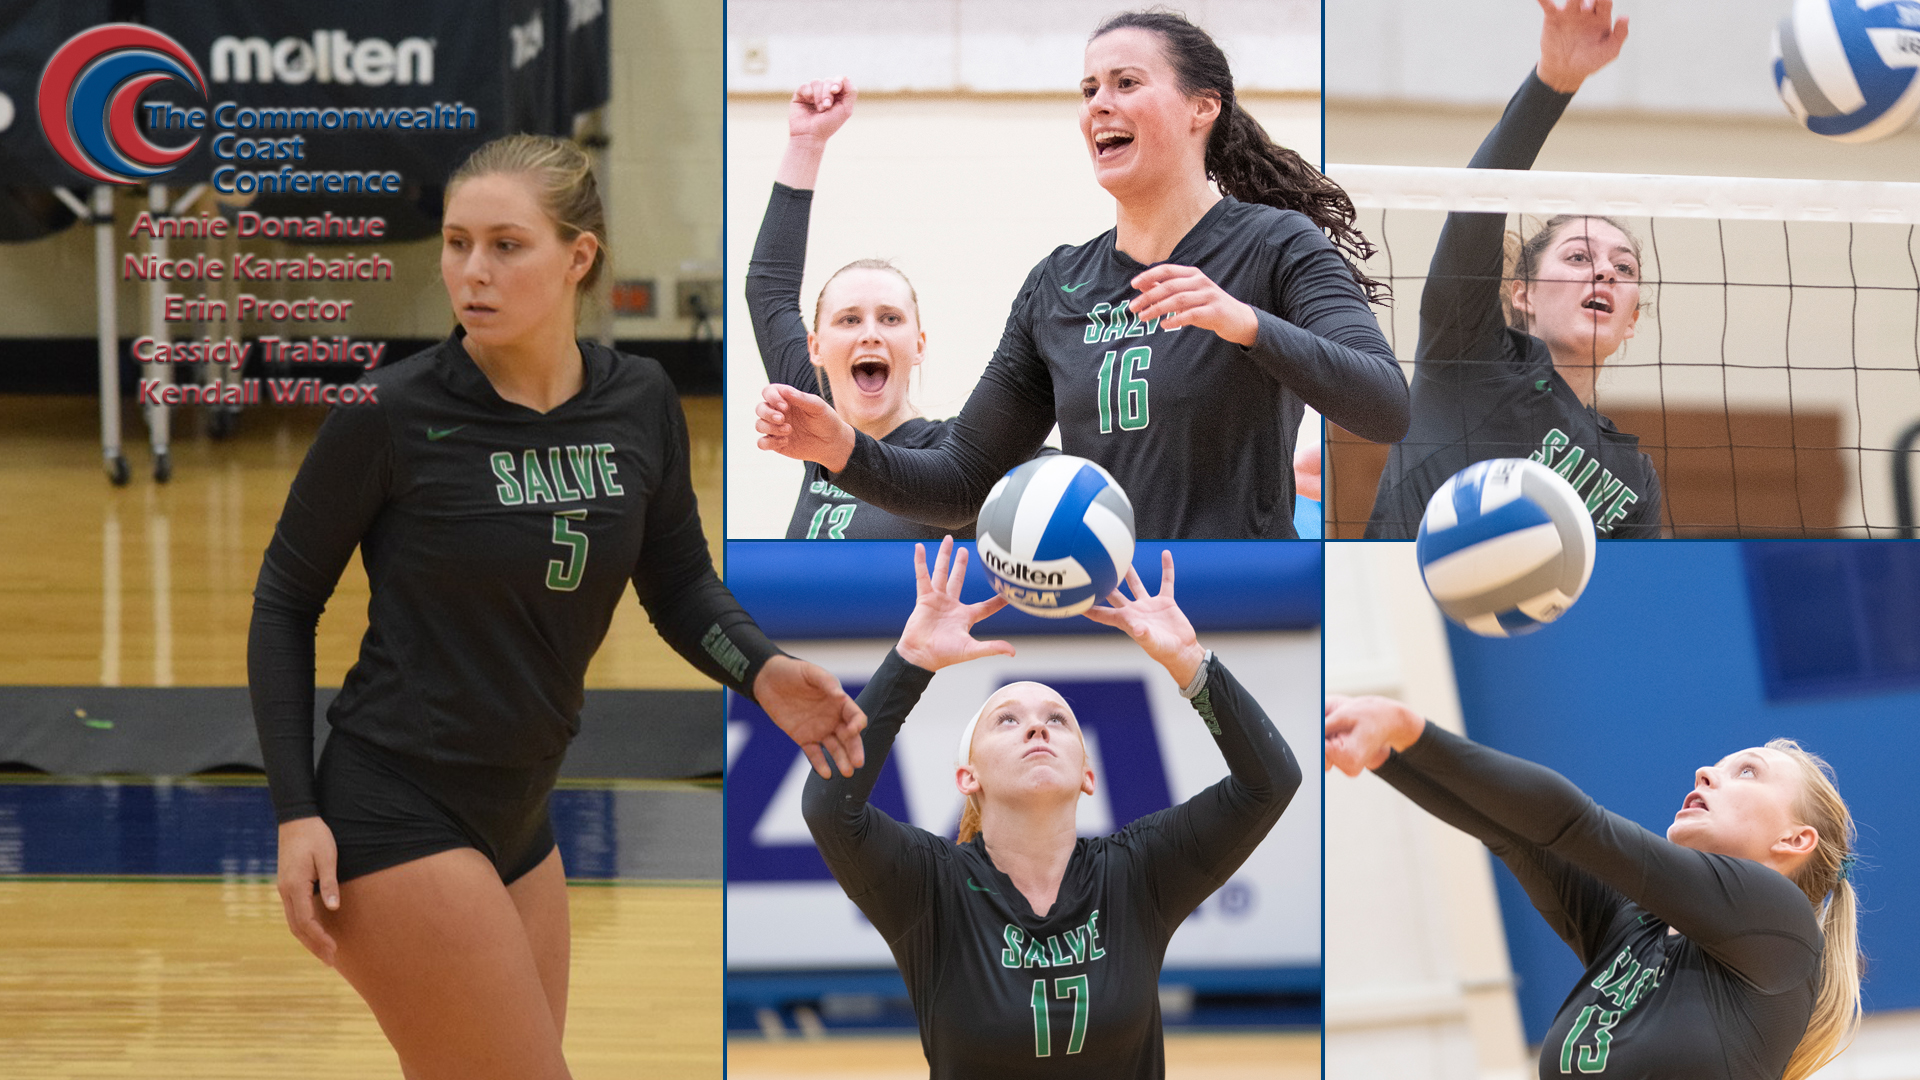 Kendall Wilcox (left) was named Senior Scholar Athlete while Nicole Karabaich, Cassidy Trabilcy, Erin Proctor, and Annie Donahue (clockwise from top right) were all named to the All-CCC squad.